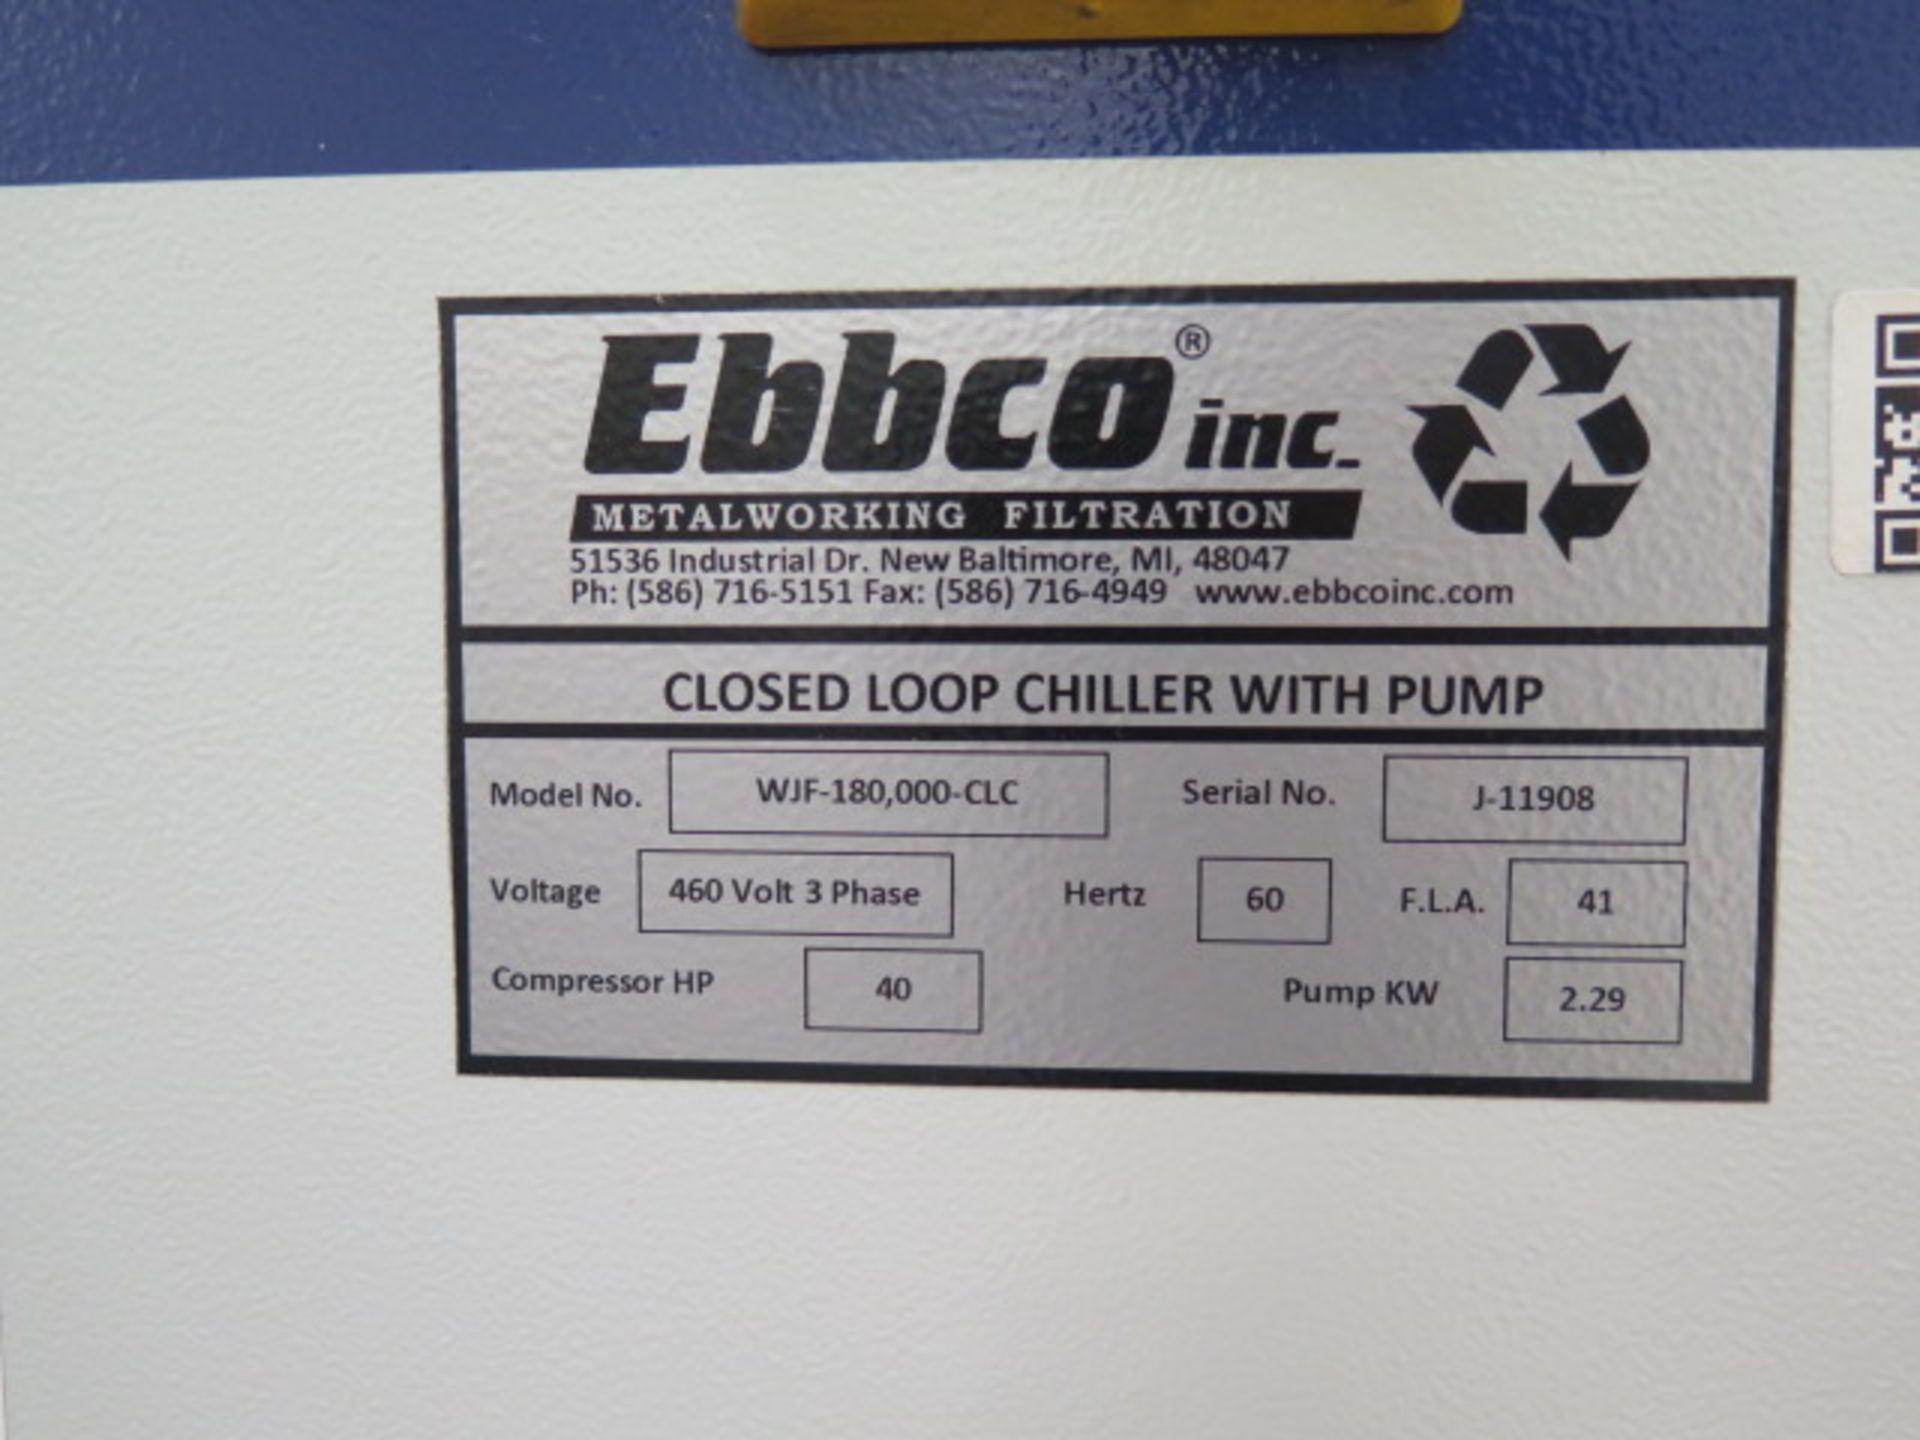 Ebbco “TEAevo Tech” Closed Loop Chiller Unit, Ebbco WJF-200V-CD Filtration System and Storage Tank - Image 8 of 8